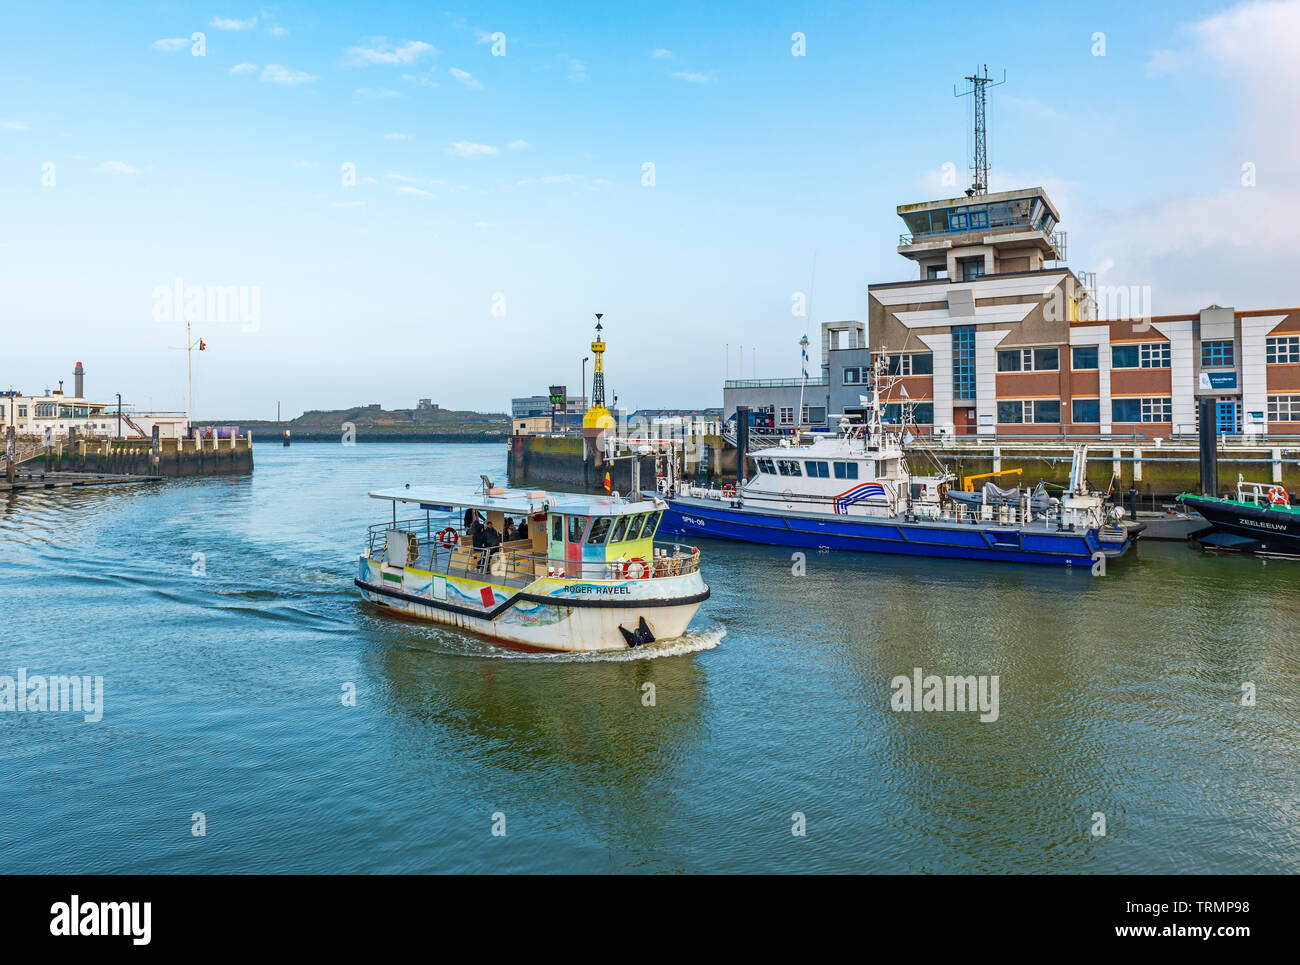 A public transport boat in the harbor of Oostende (Ostend) with the harbor center building, West Flanders, Belgium. Stock Photo